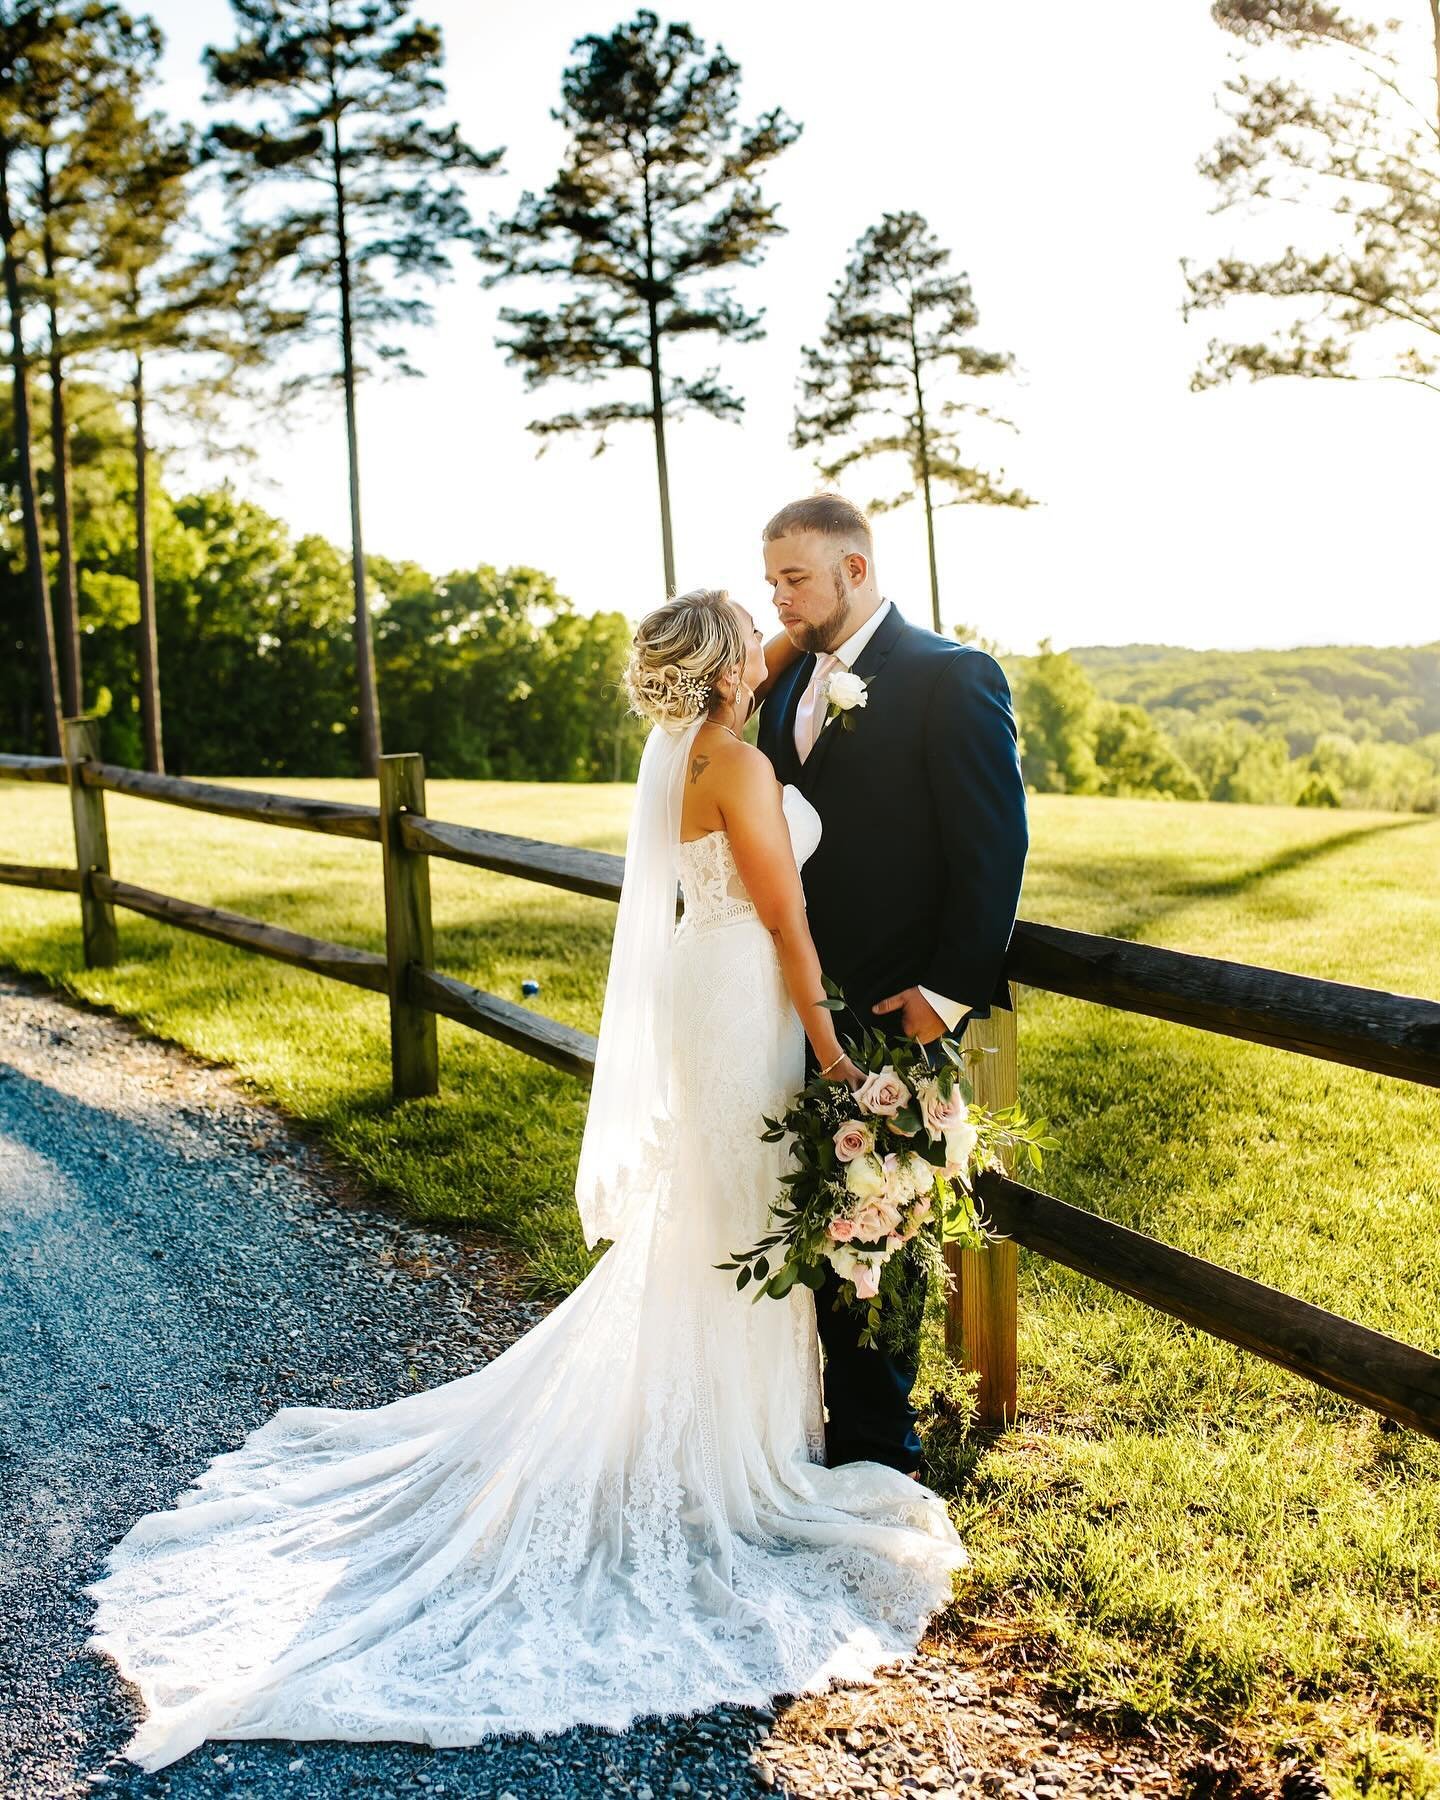 We&rsquo;re a few days late, but it&rsquo;s better late than never when it comes to wishing these two a happy anniversary! What a better way to celebrate than reminiscing on their stunning May wedding. ✨💐 

From beginning to end this group was a bla